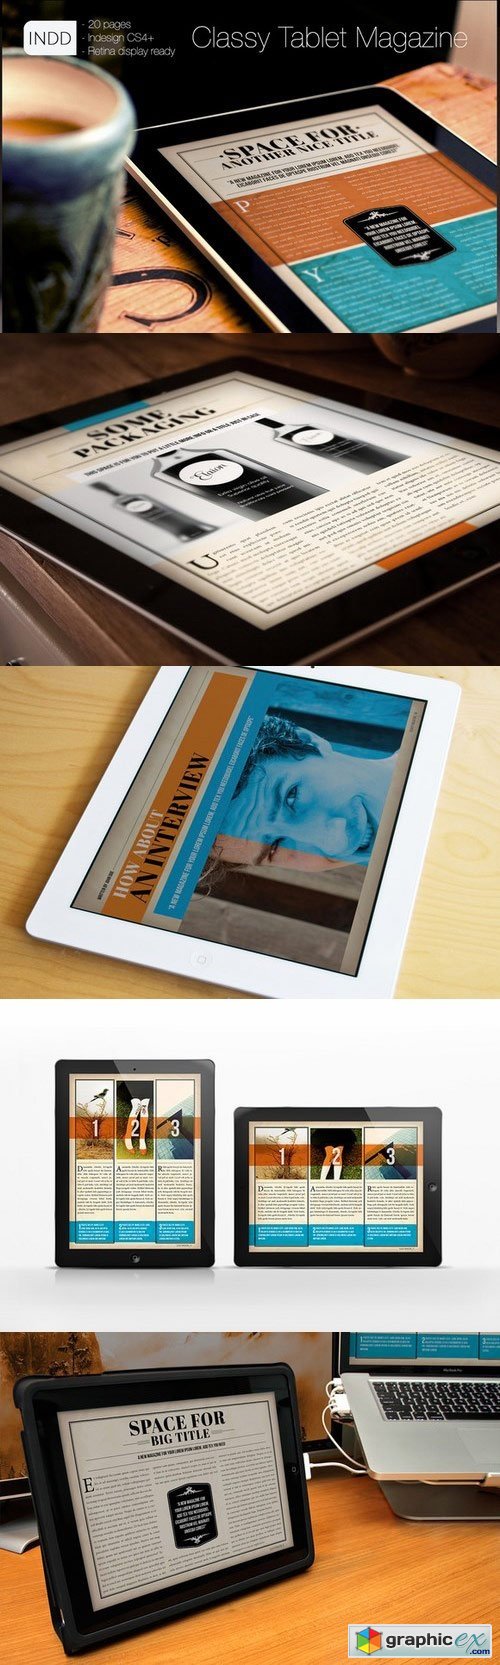 Classy MGZ for Tablet